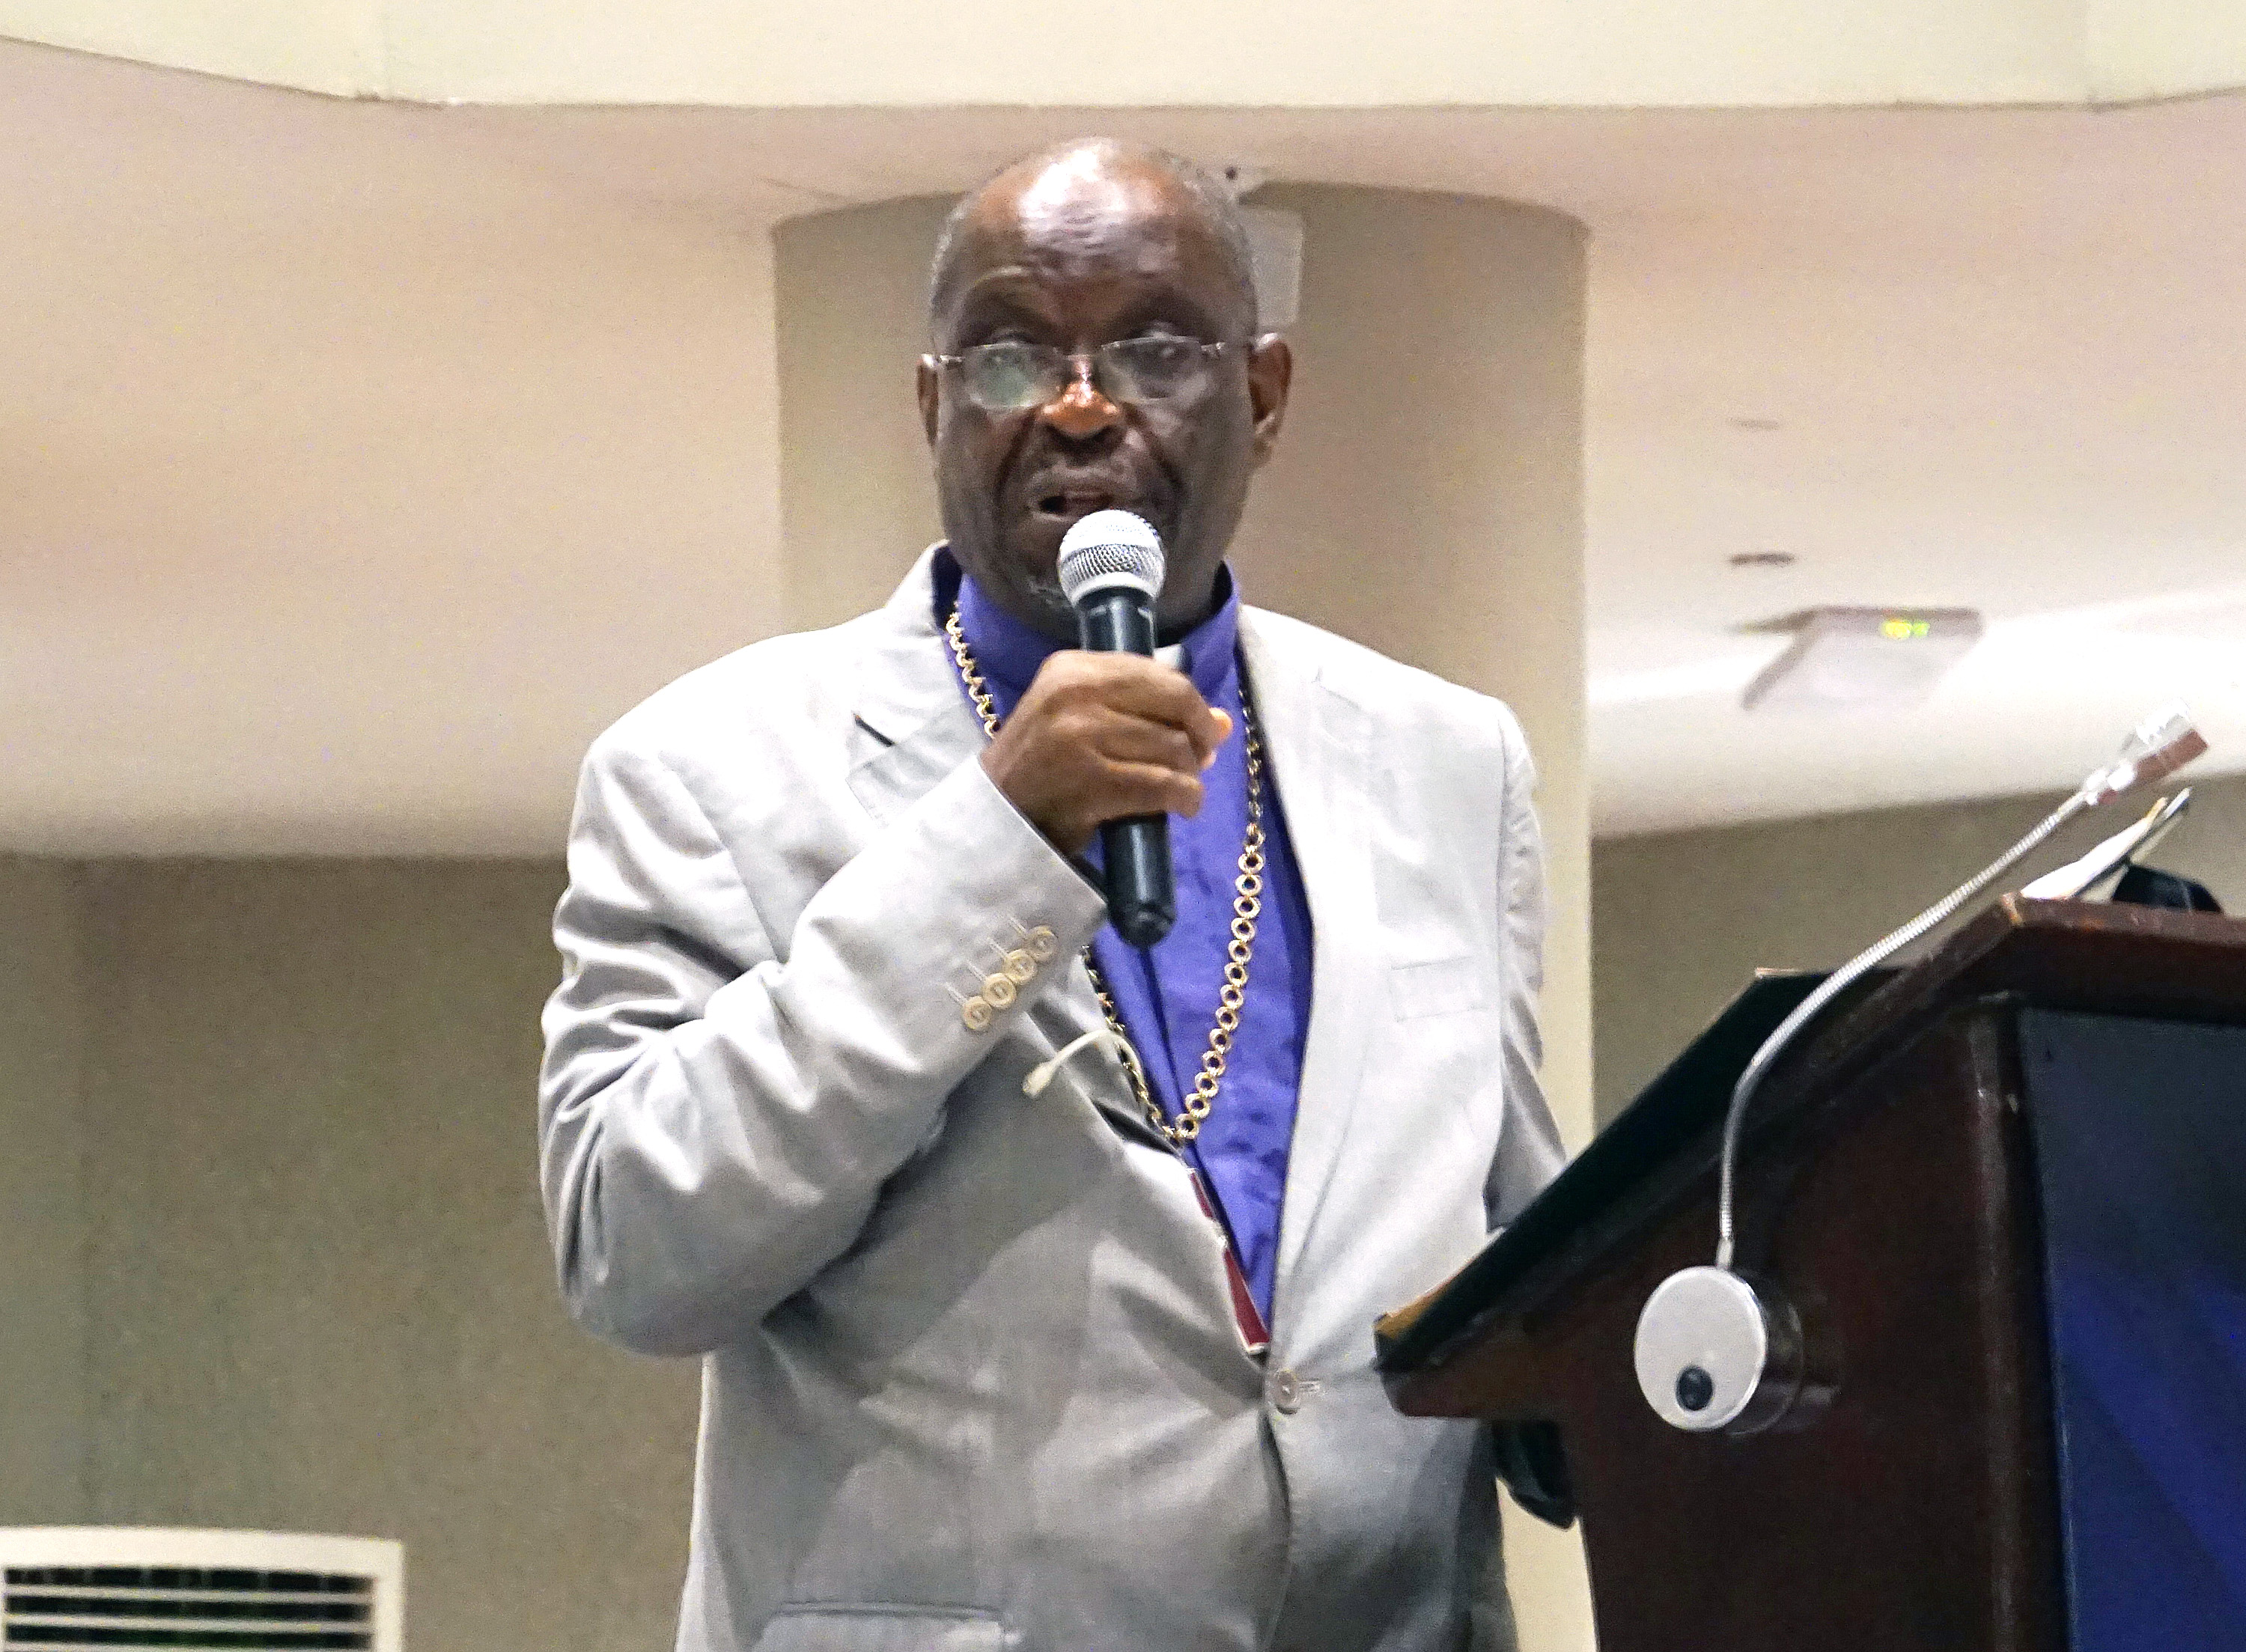  Bishop Arnold C. Temple speaks during the African College of Bishops meeting Sept. 4-7, 2018, in Freetown, Sierra Leone. Temple is president of the All Africa Conference of Churches. Photo by Danny Mai, United Methodist Communications.